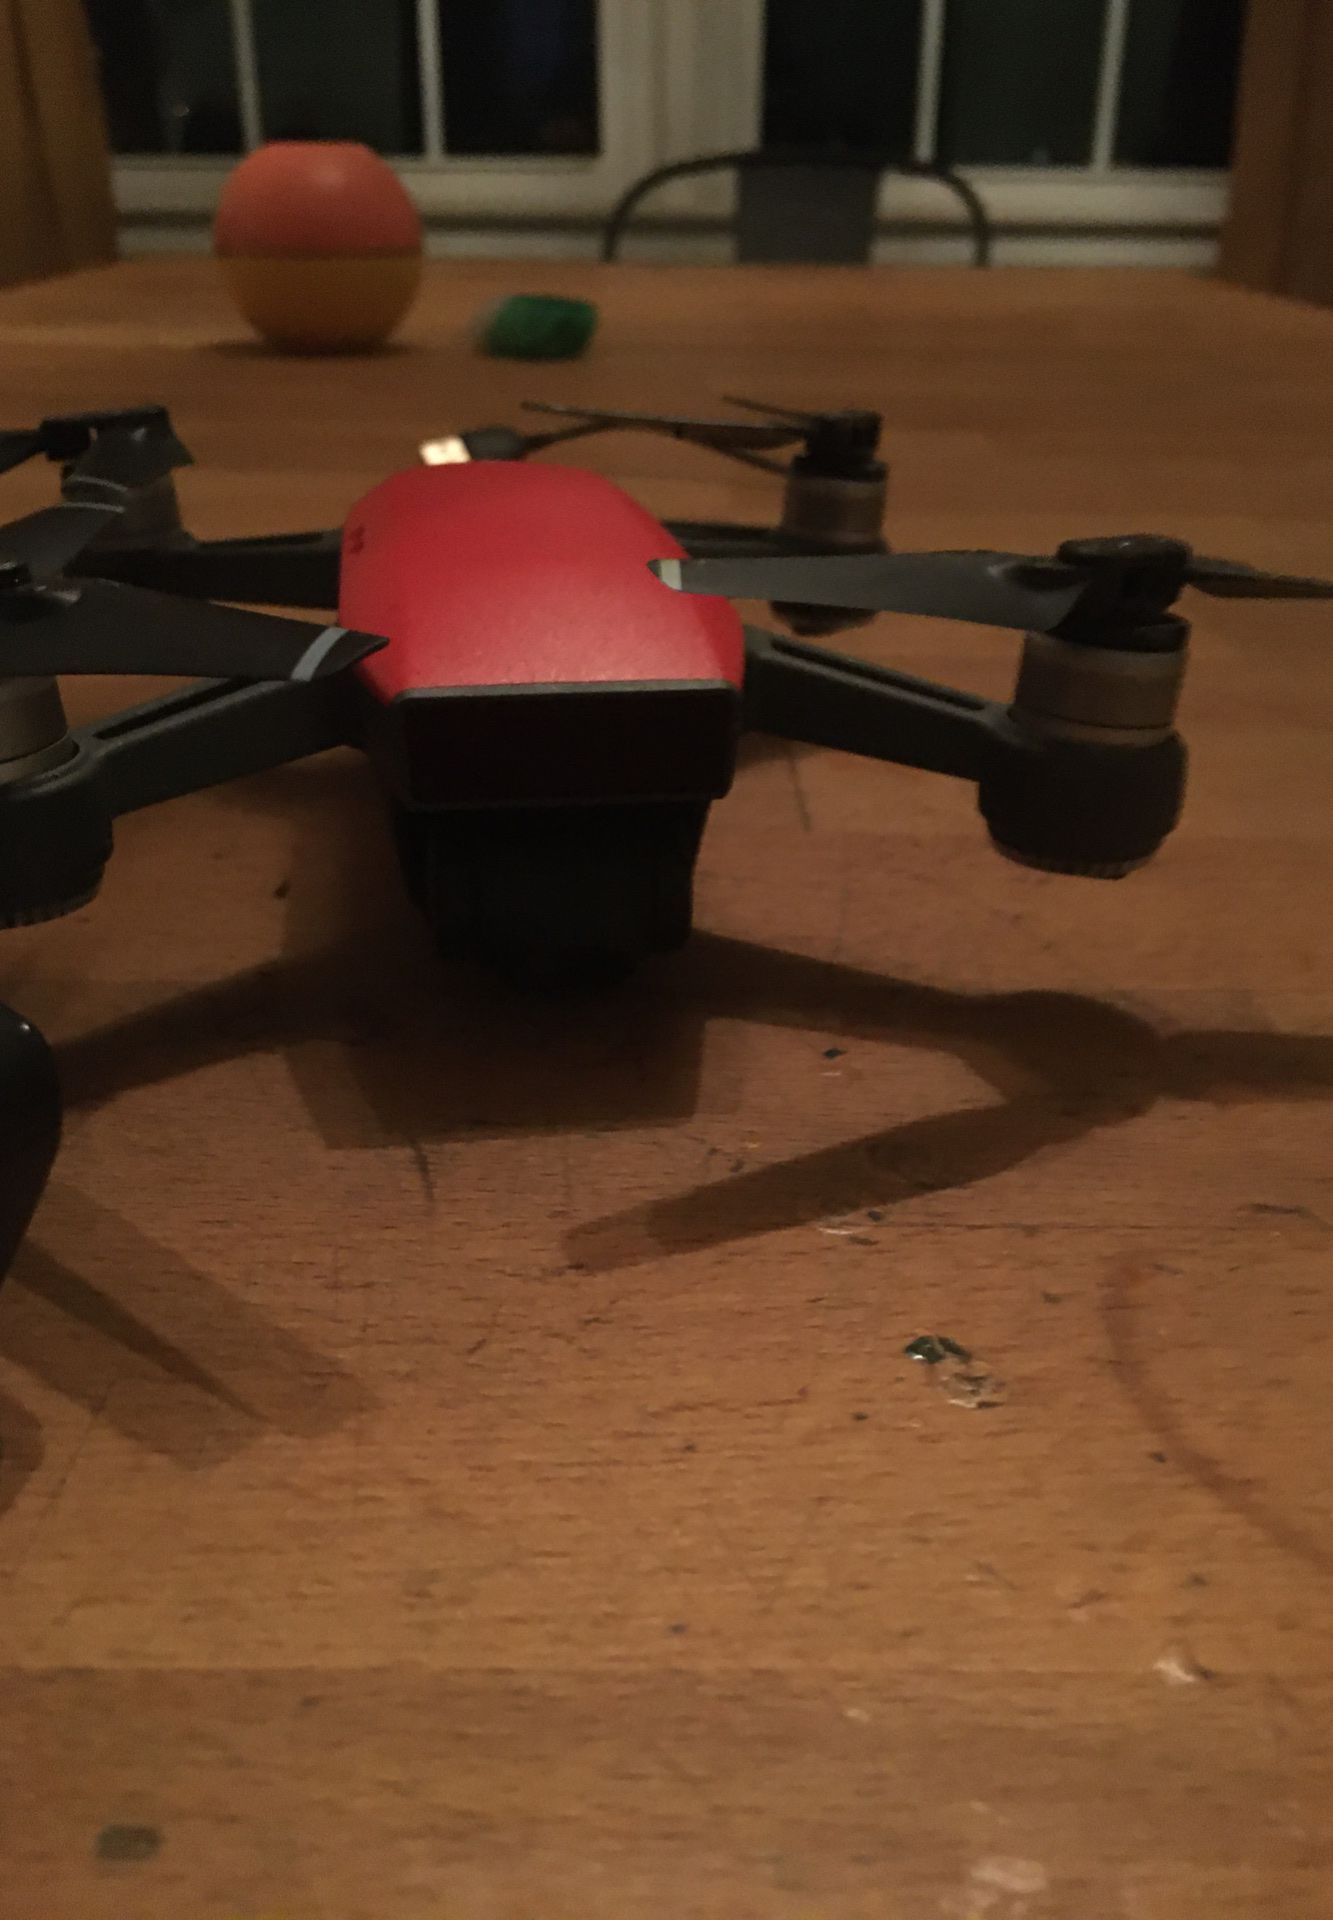 Dji Spark drone and extras